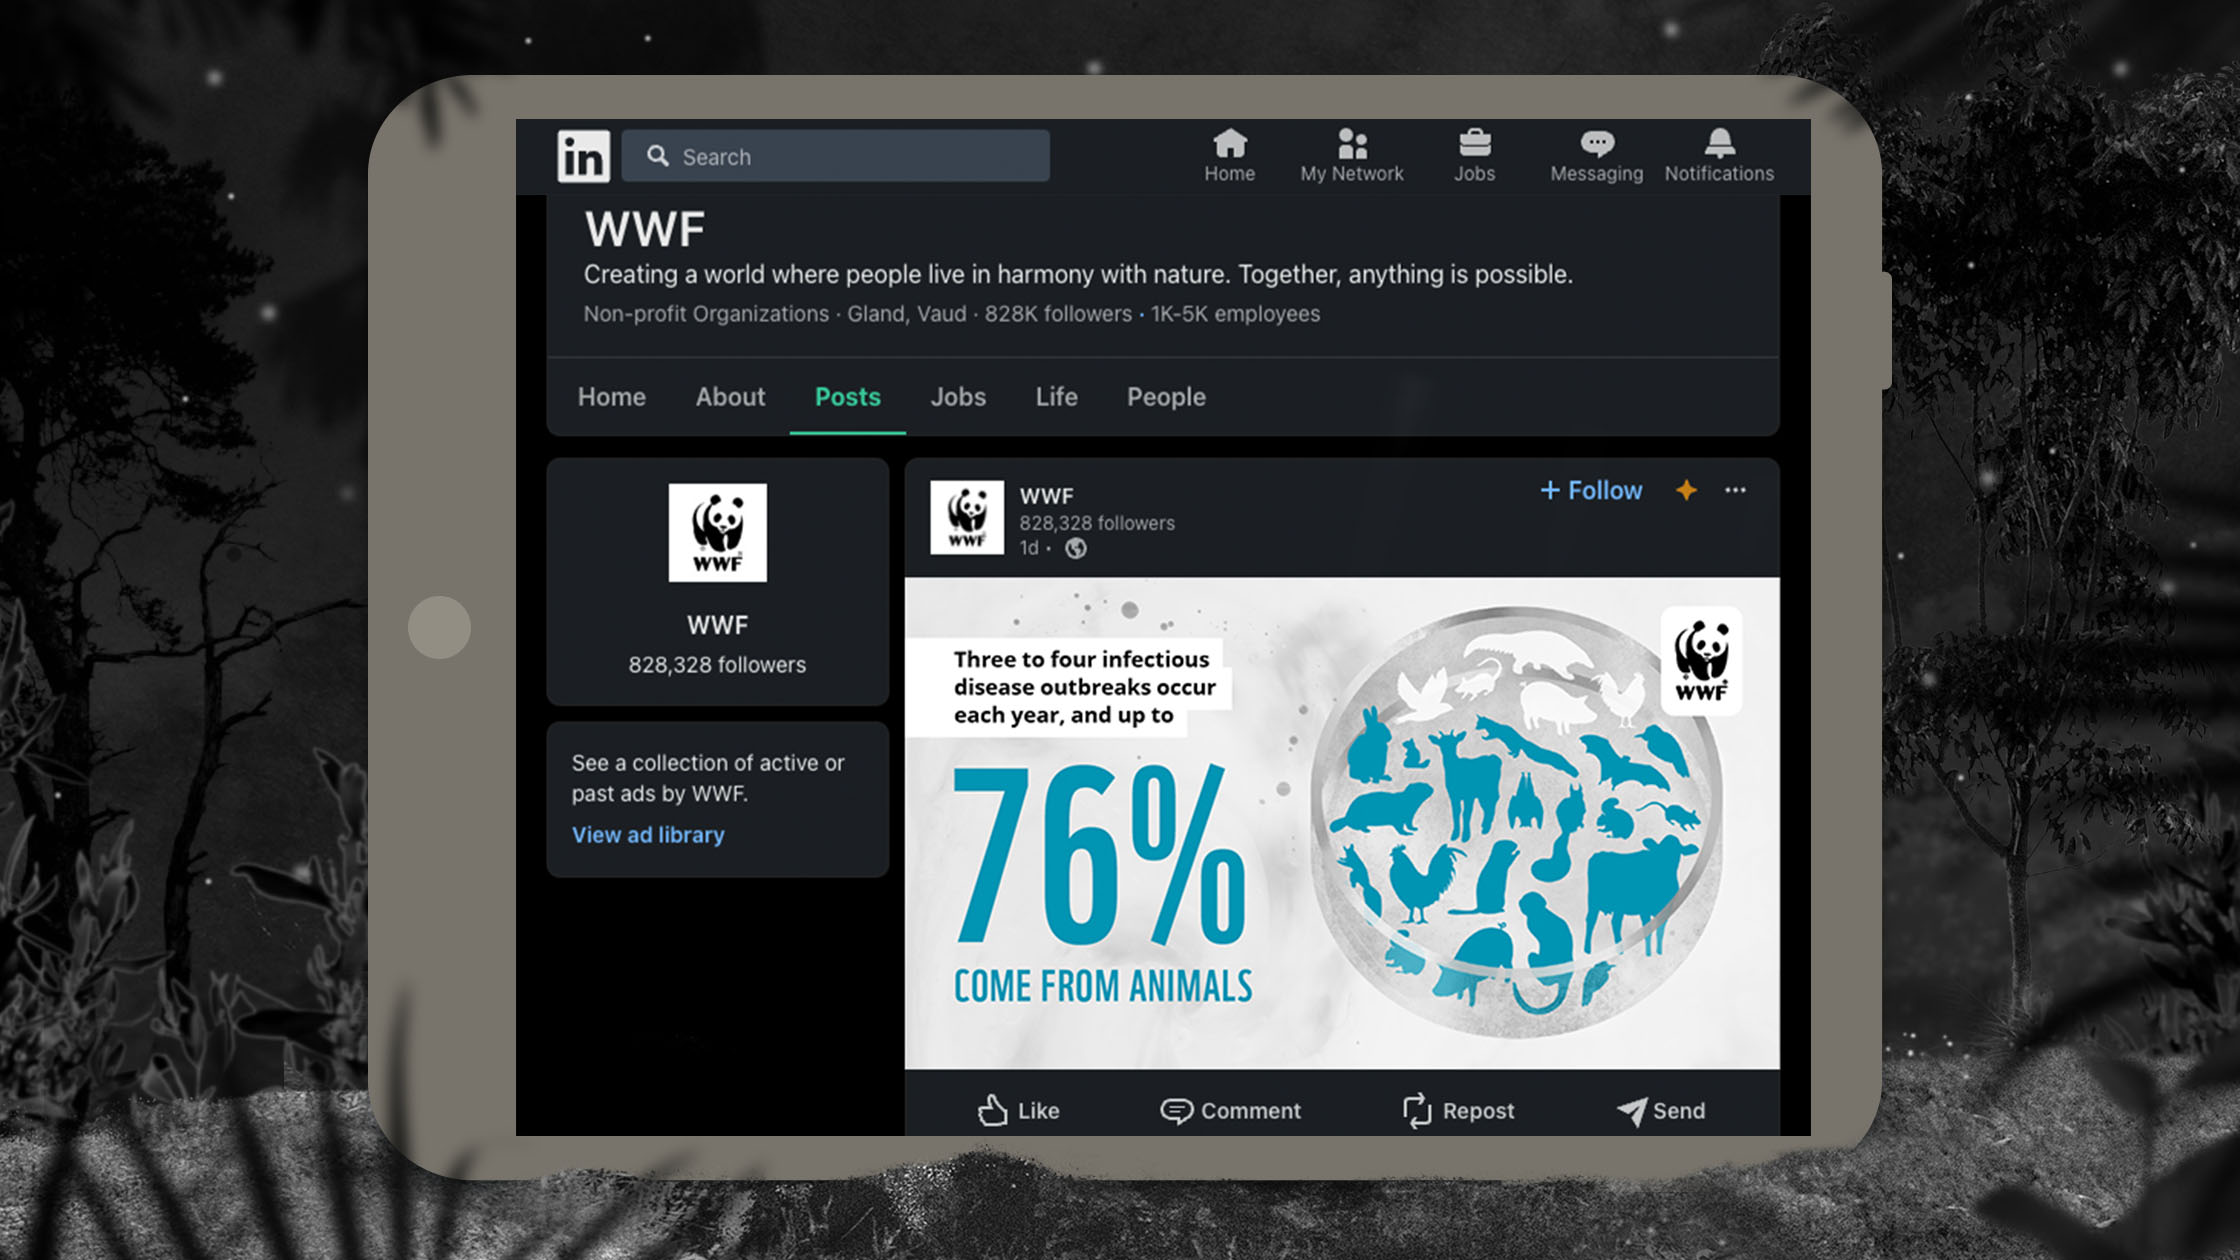 A smartphone screen displays a LinkedIn page for WWF. The post shown states, "Three to four infectious disease outbreaks occur each year, and 75% come from animals," accompanied by an illustration of animals around a globe in blue color.